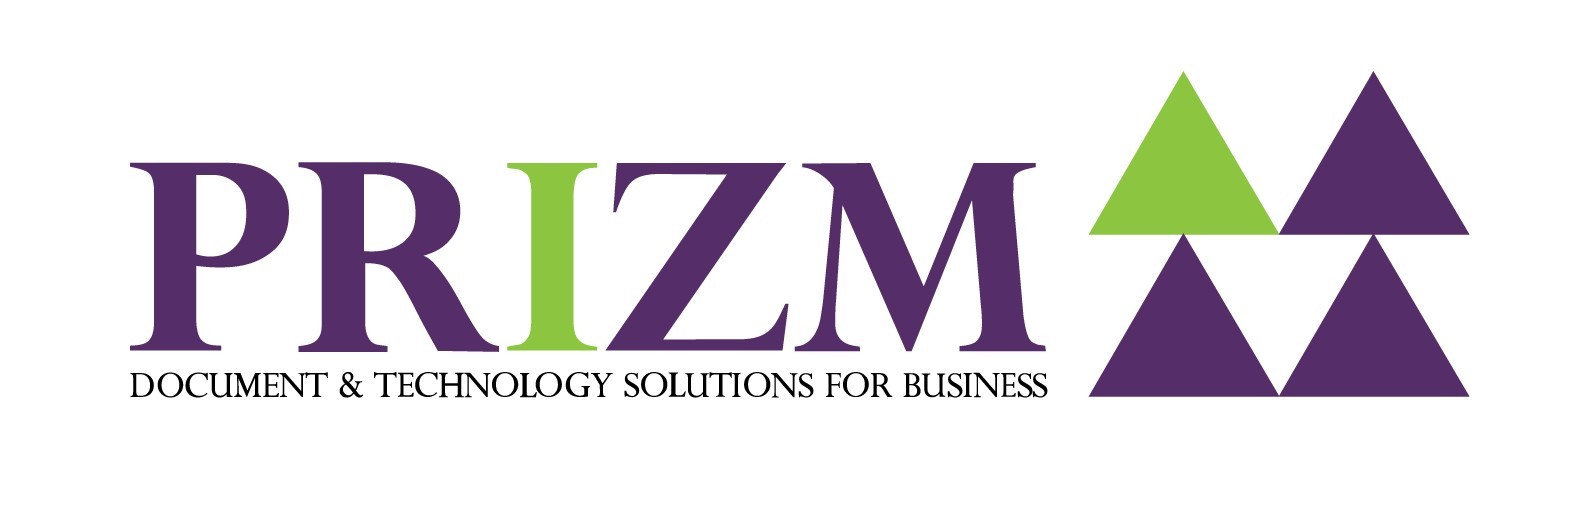 Prizm Document & Technology Solutions Buffalo - Managed IT Services & MFP Compan